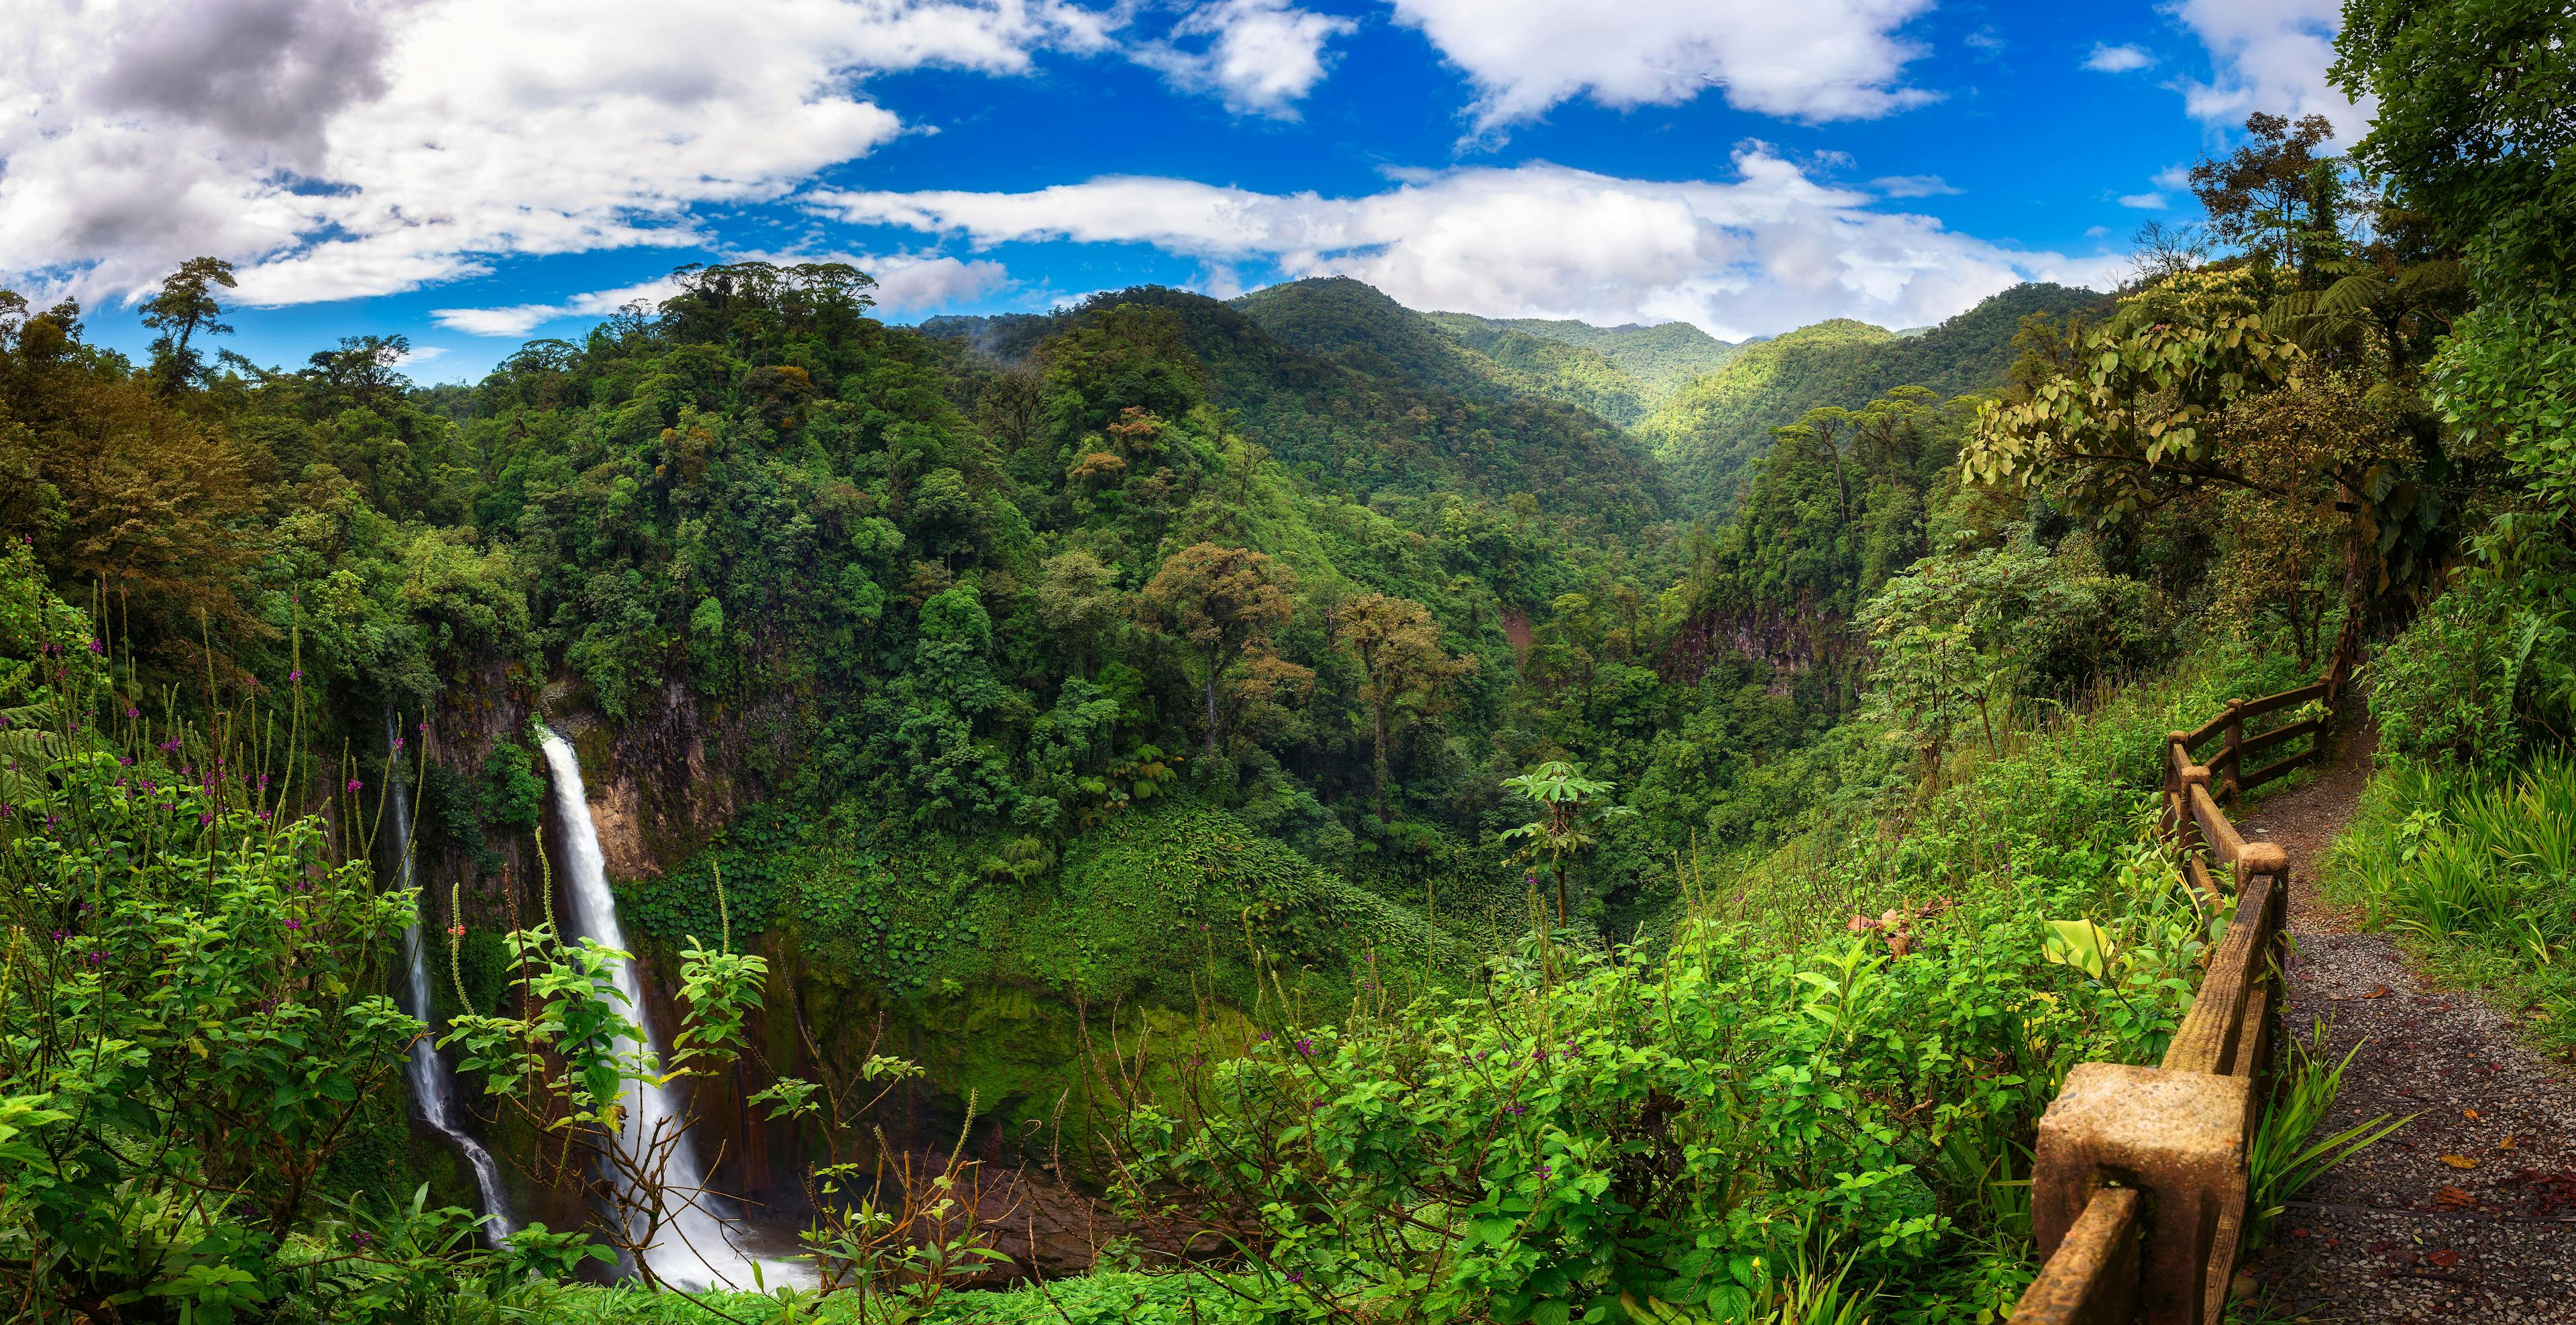 3 Best Cities for Digital Nomads in Costa Rica